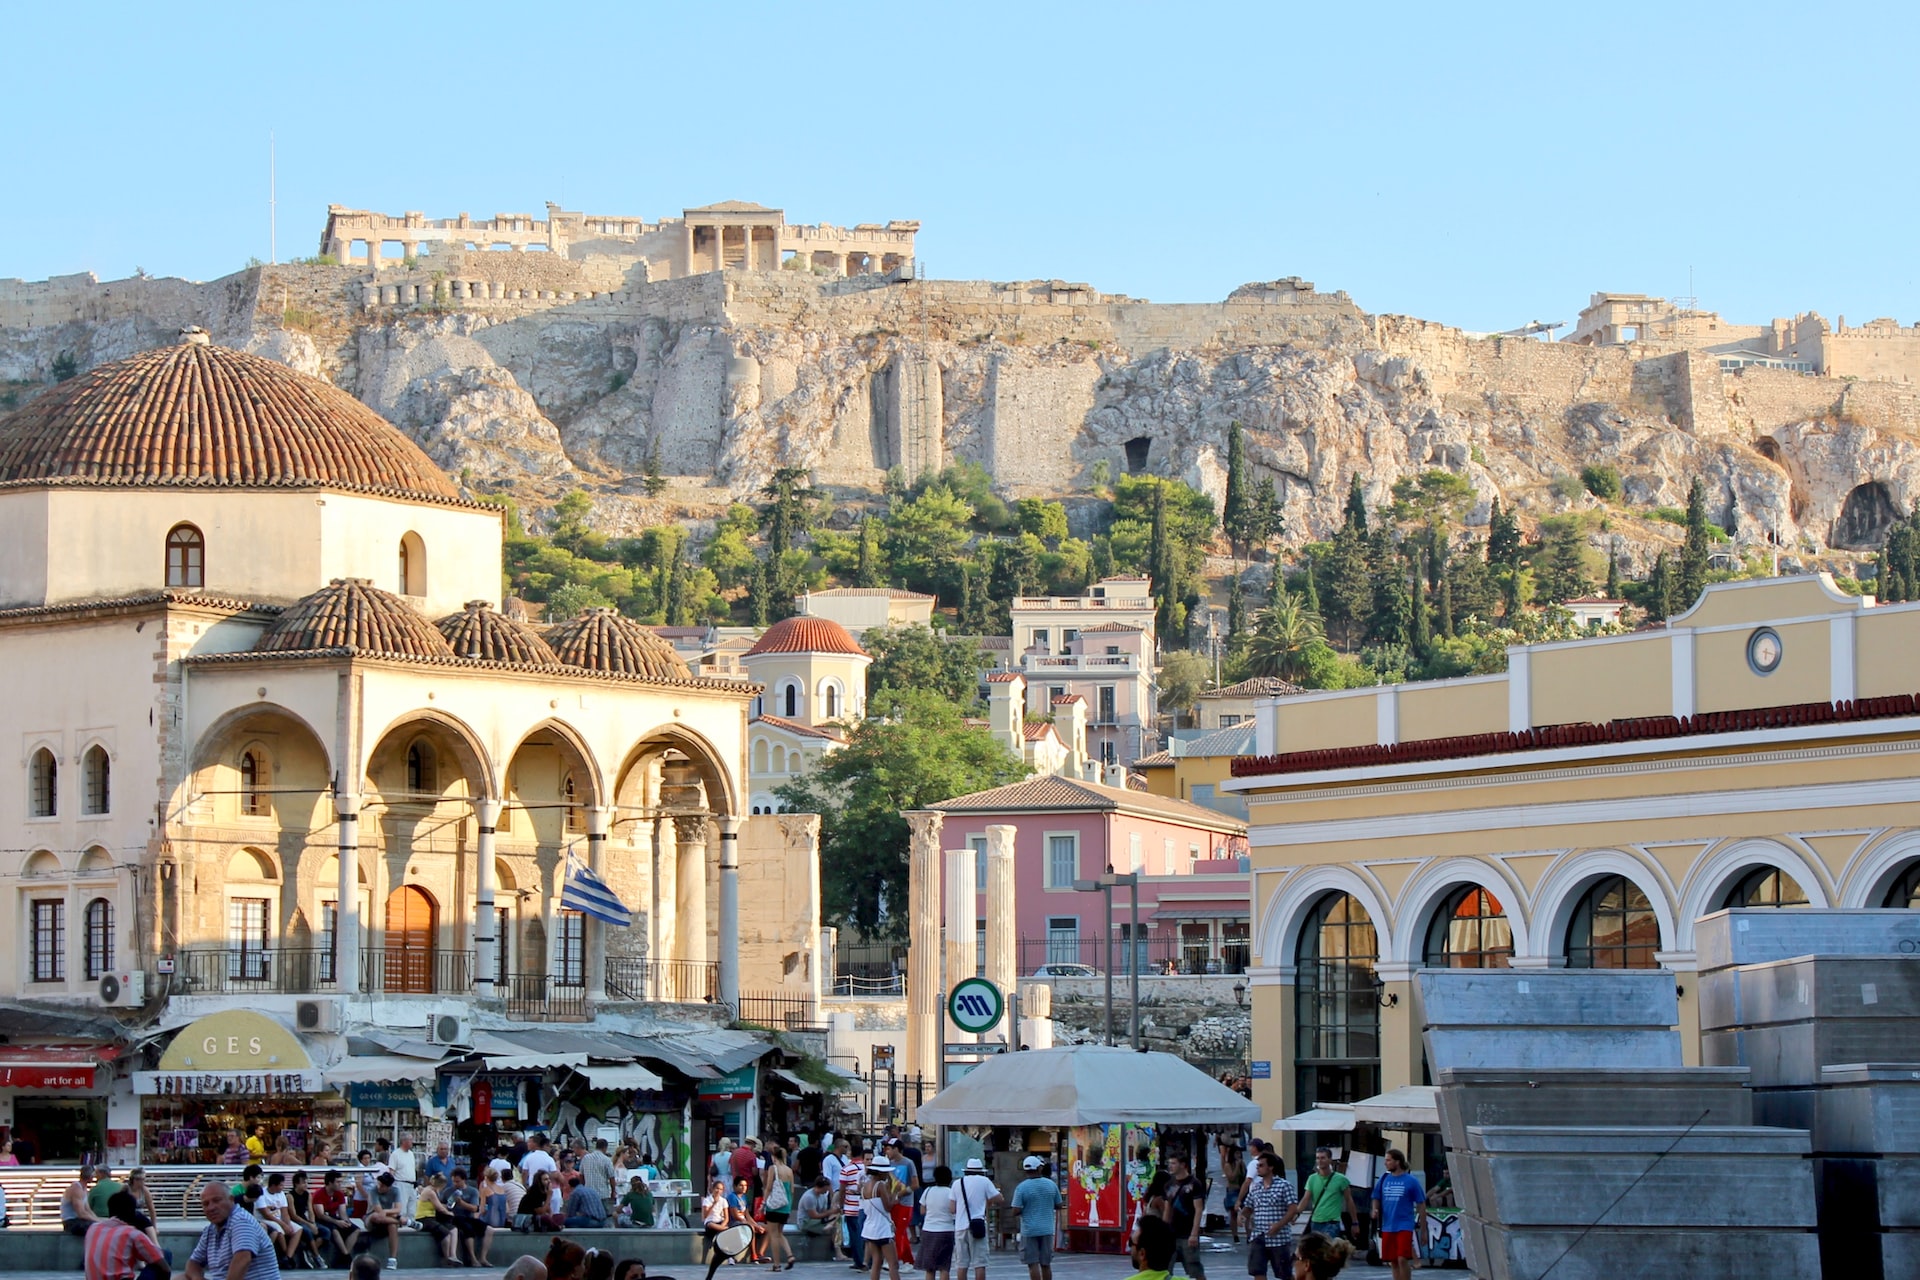 People walking along the busy streets in Athens with the Acropolis in the distance.